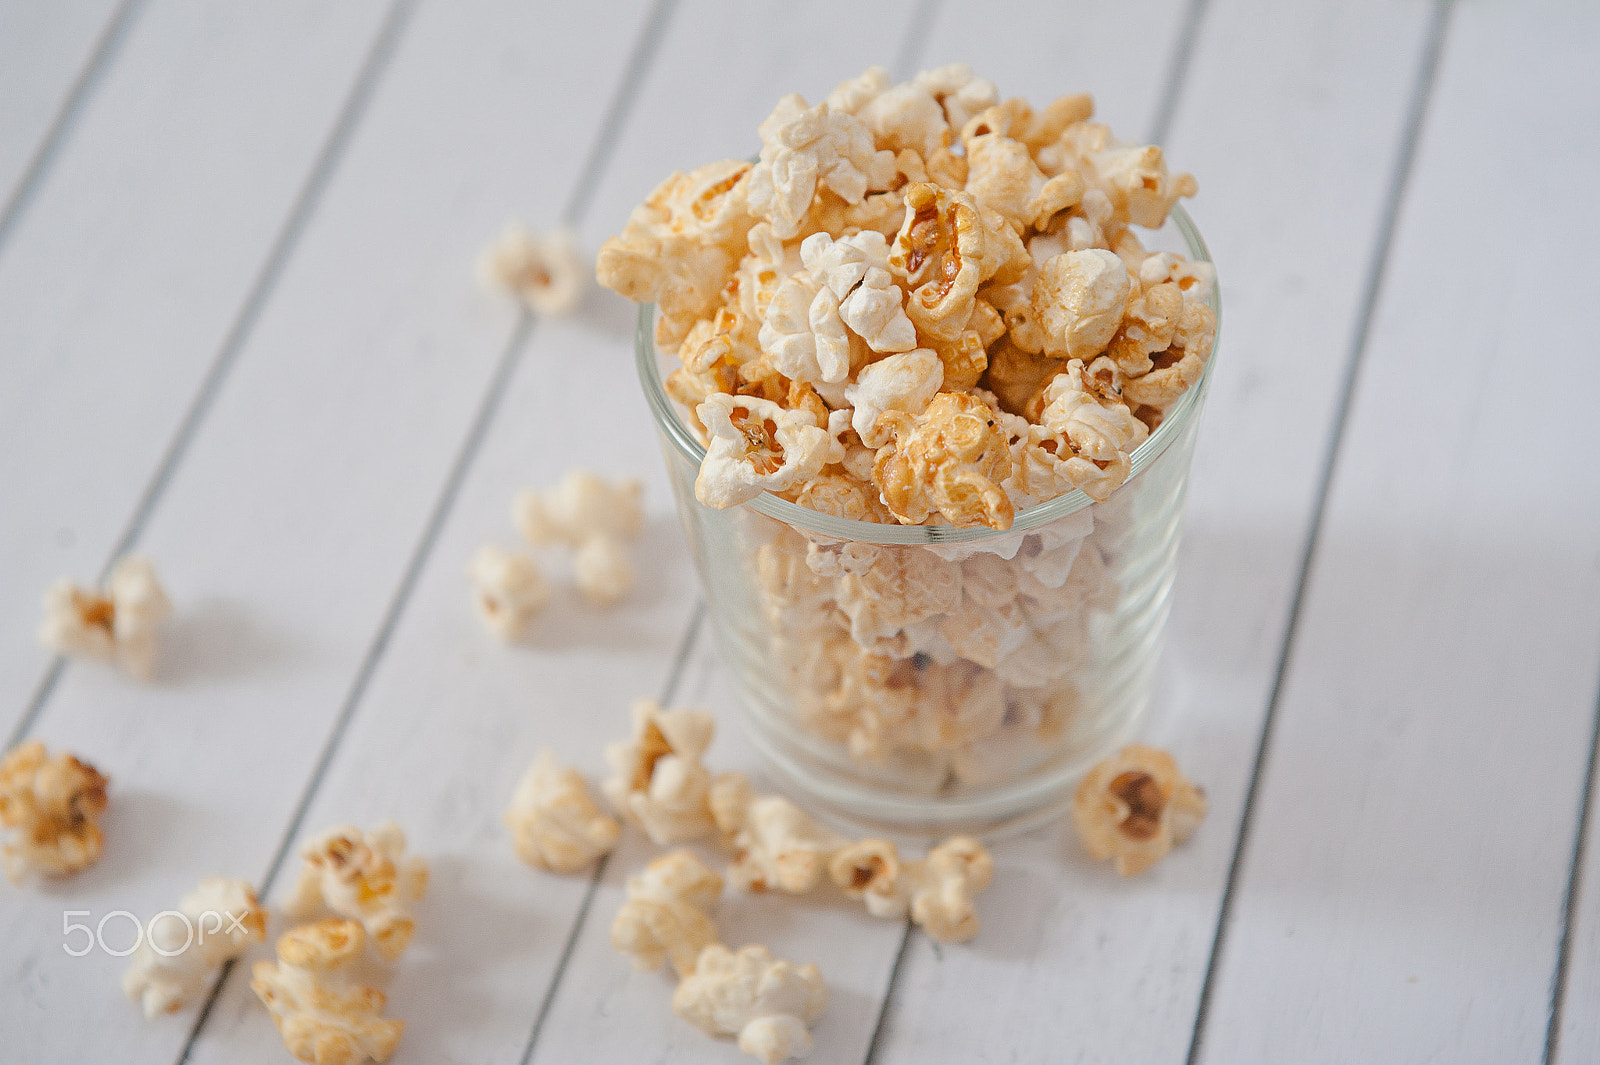 Nikon D700 sample photo. Popcorn in glass cup on white background photography